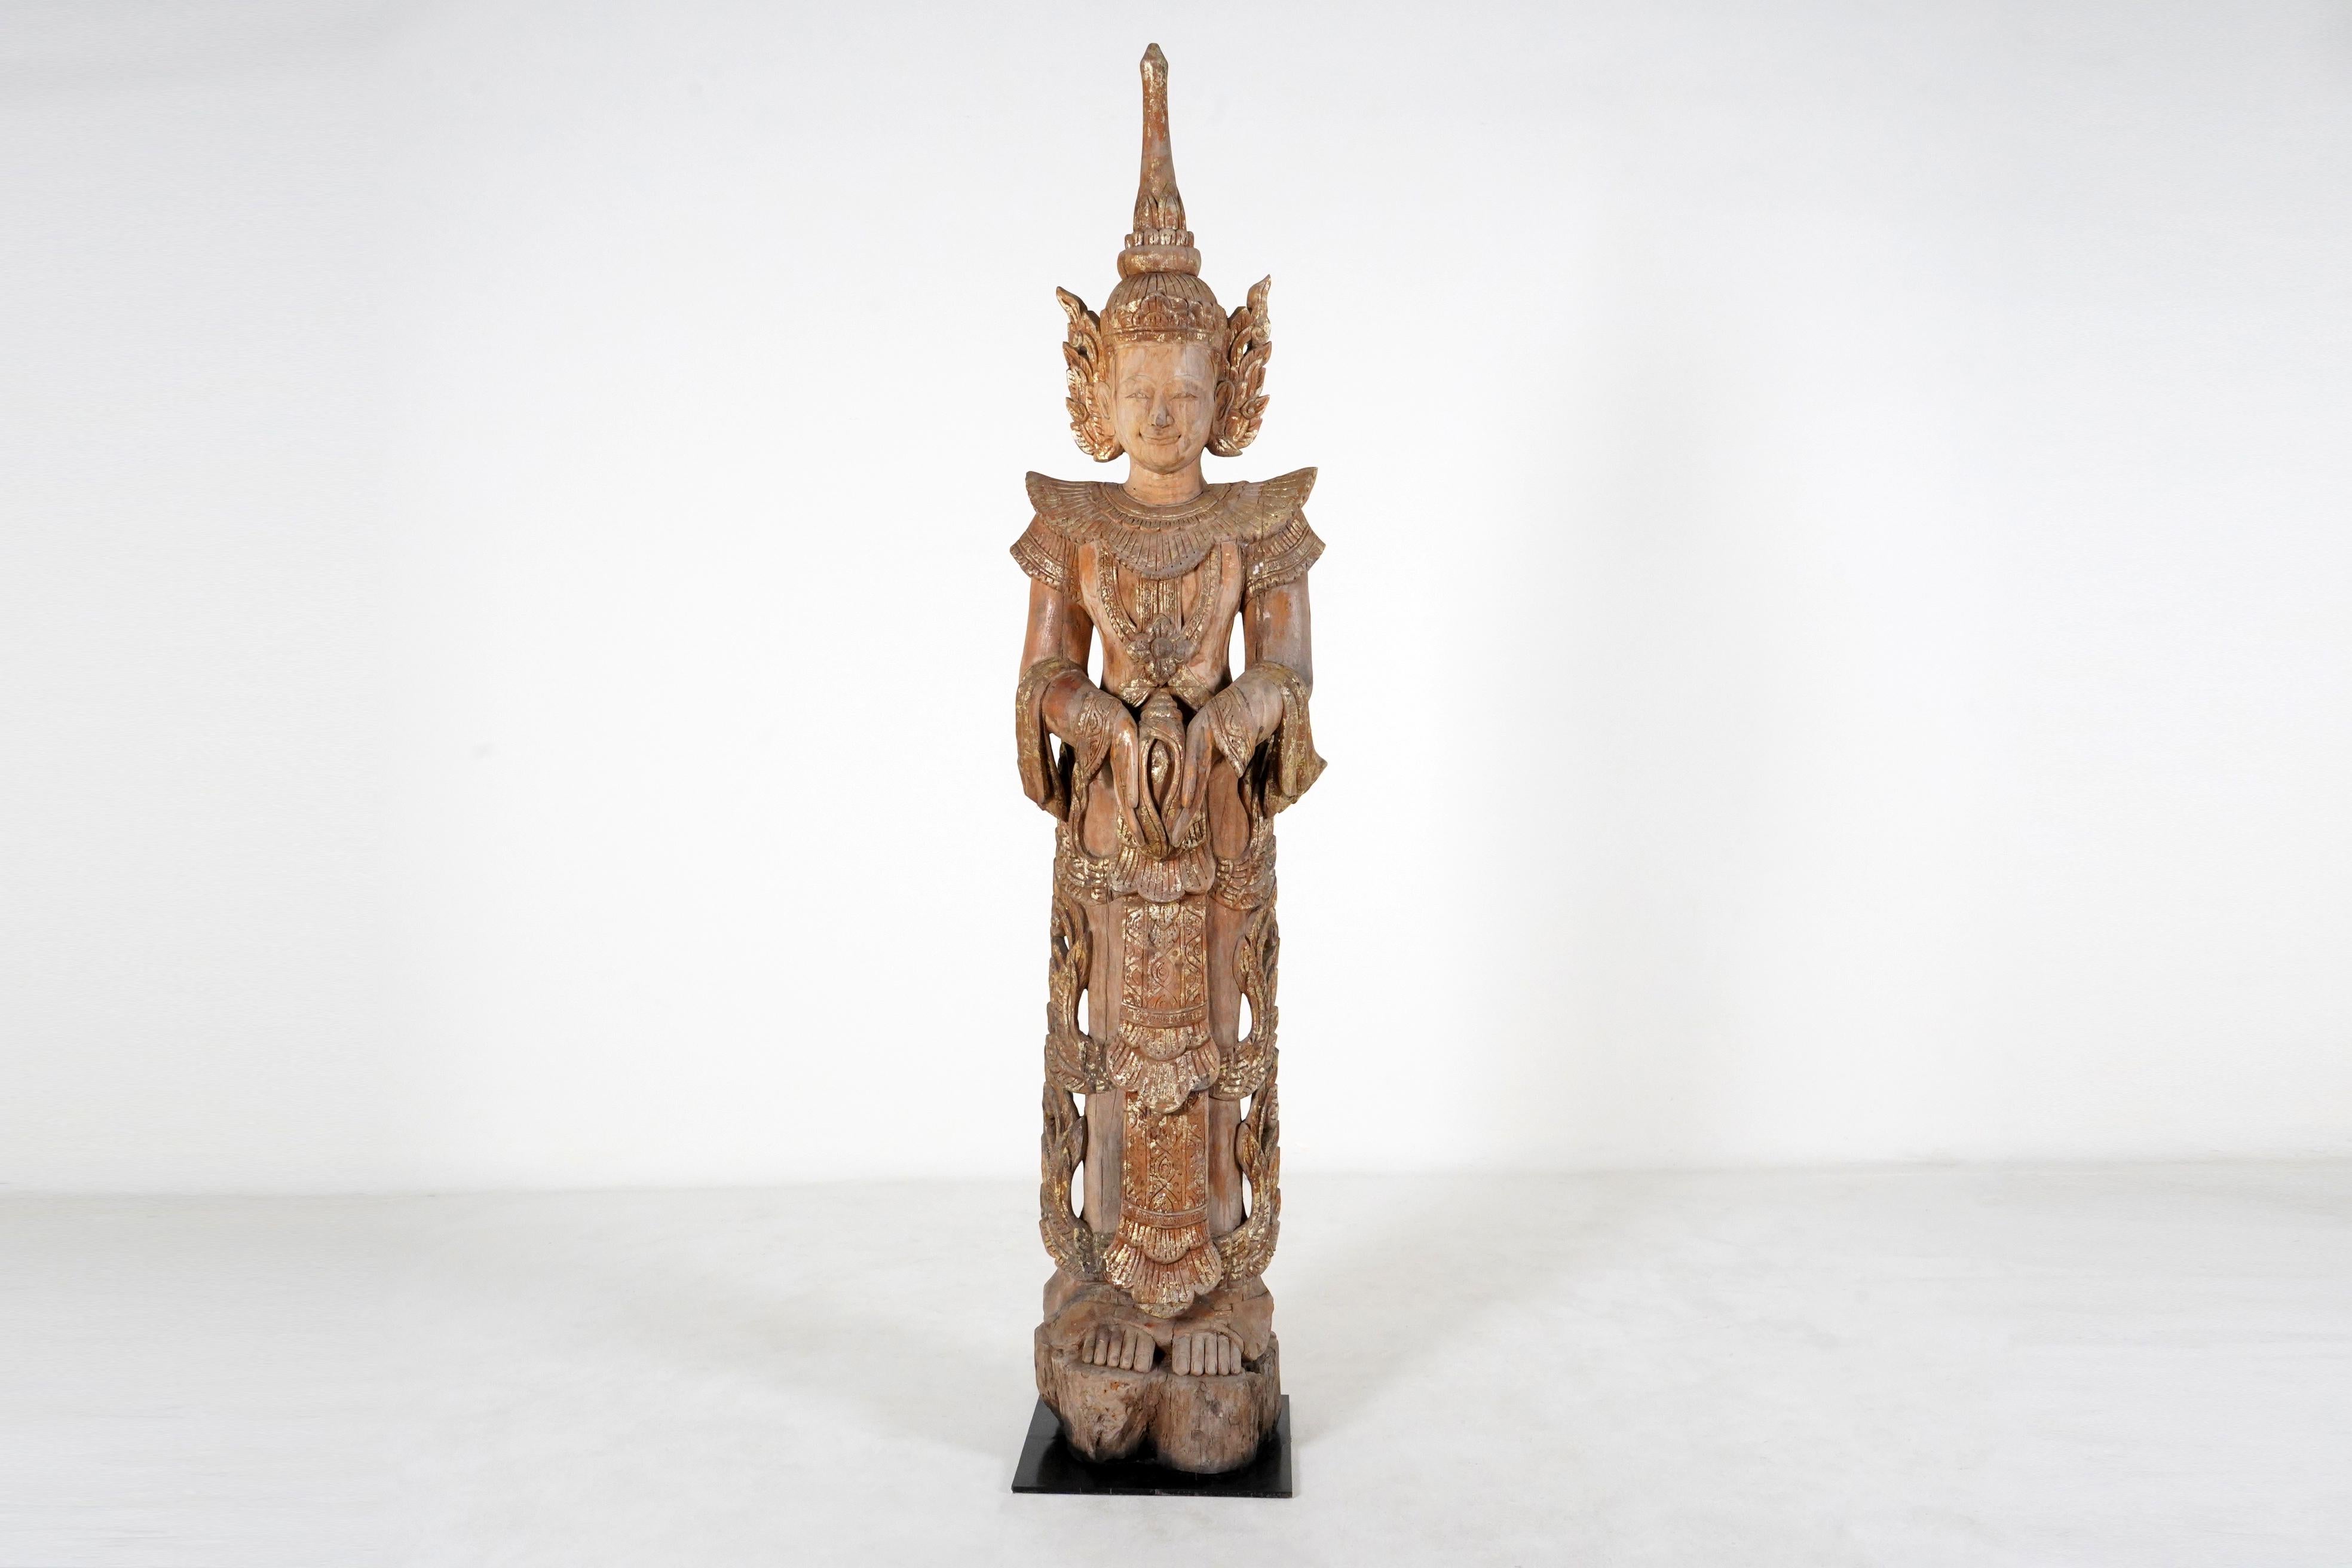 Thai temples contained various kinds of carved figures including Buddhas, apostles and angels. This large blessing angel is based on sculptures that flanked altars or entrances. Thai Buddhists, like members of other faiths, believe that benign